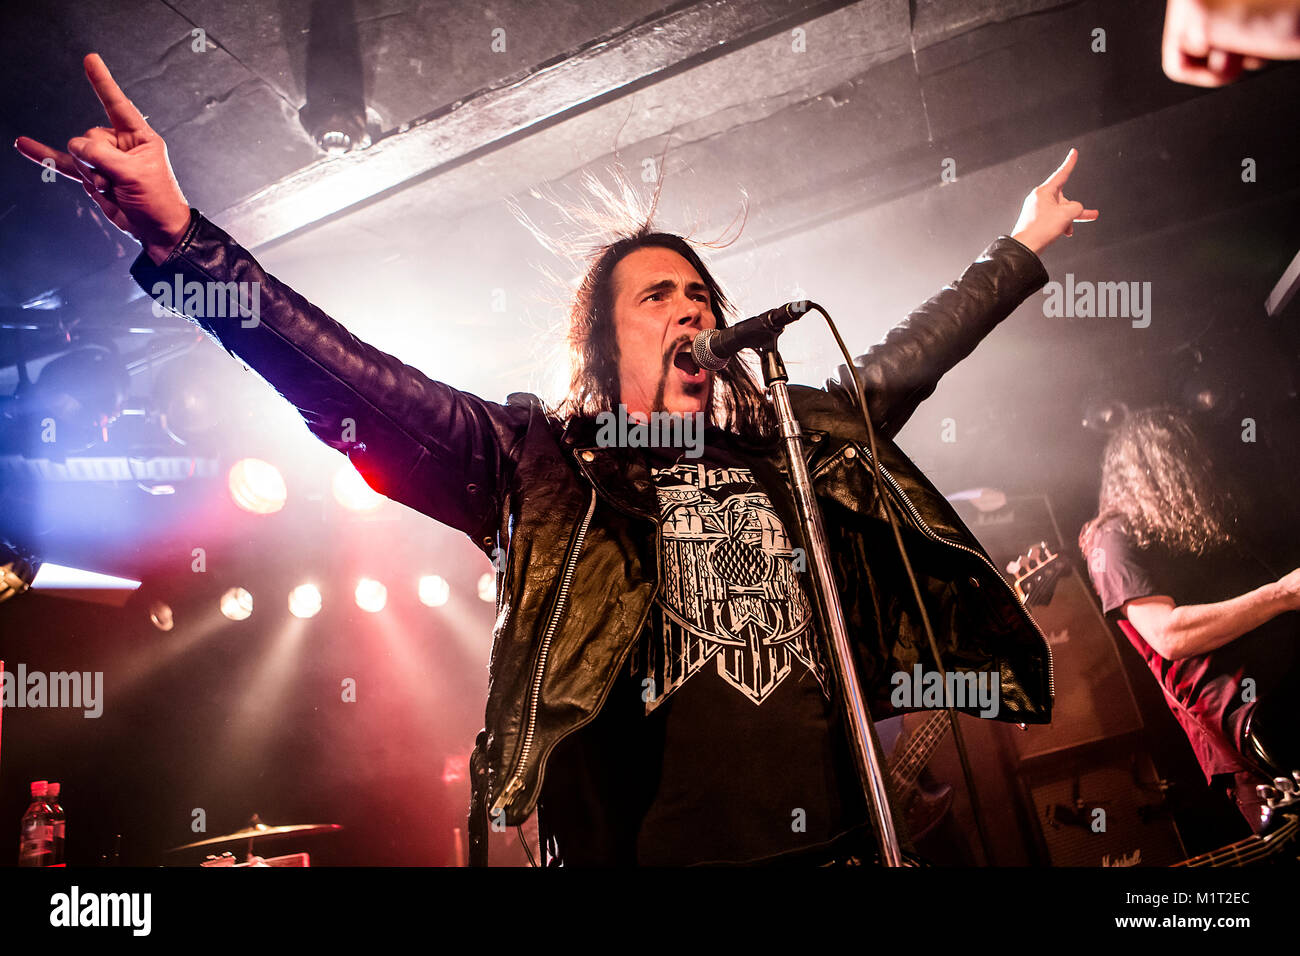 The American stoner rock band Monster Magnet performs live at Garage in Bergen. Here vocalist Dave Wyndorf is seen live on stage. Norway, 07/03 2016. Stock Photo